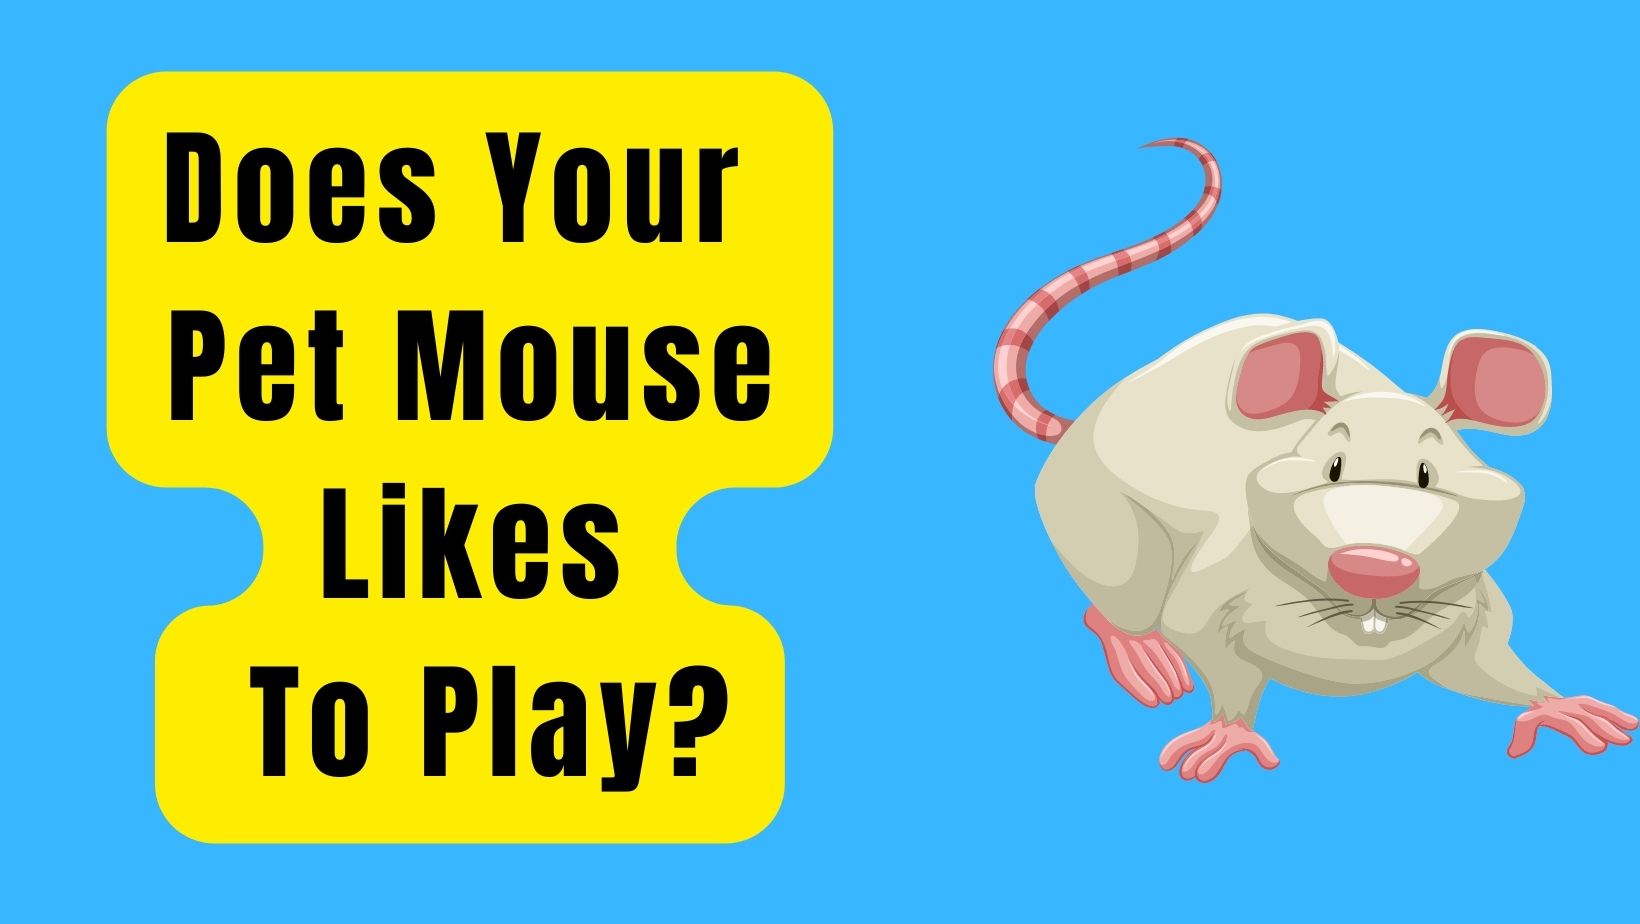 Does Your Pet Mouse Like To Play